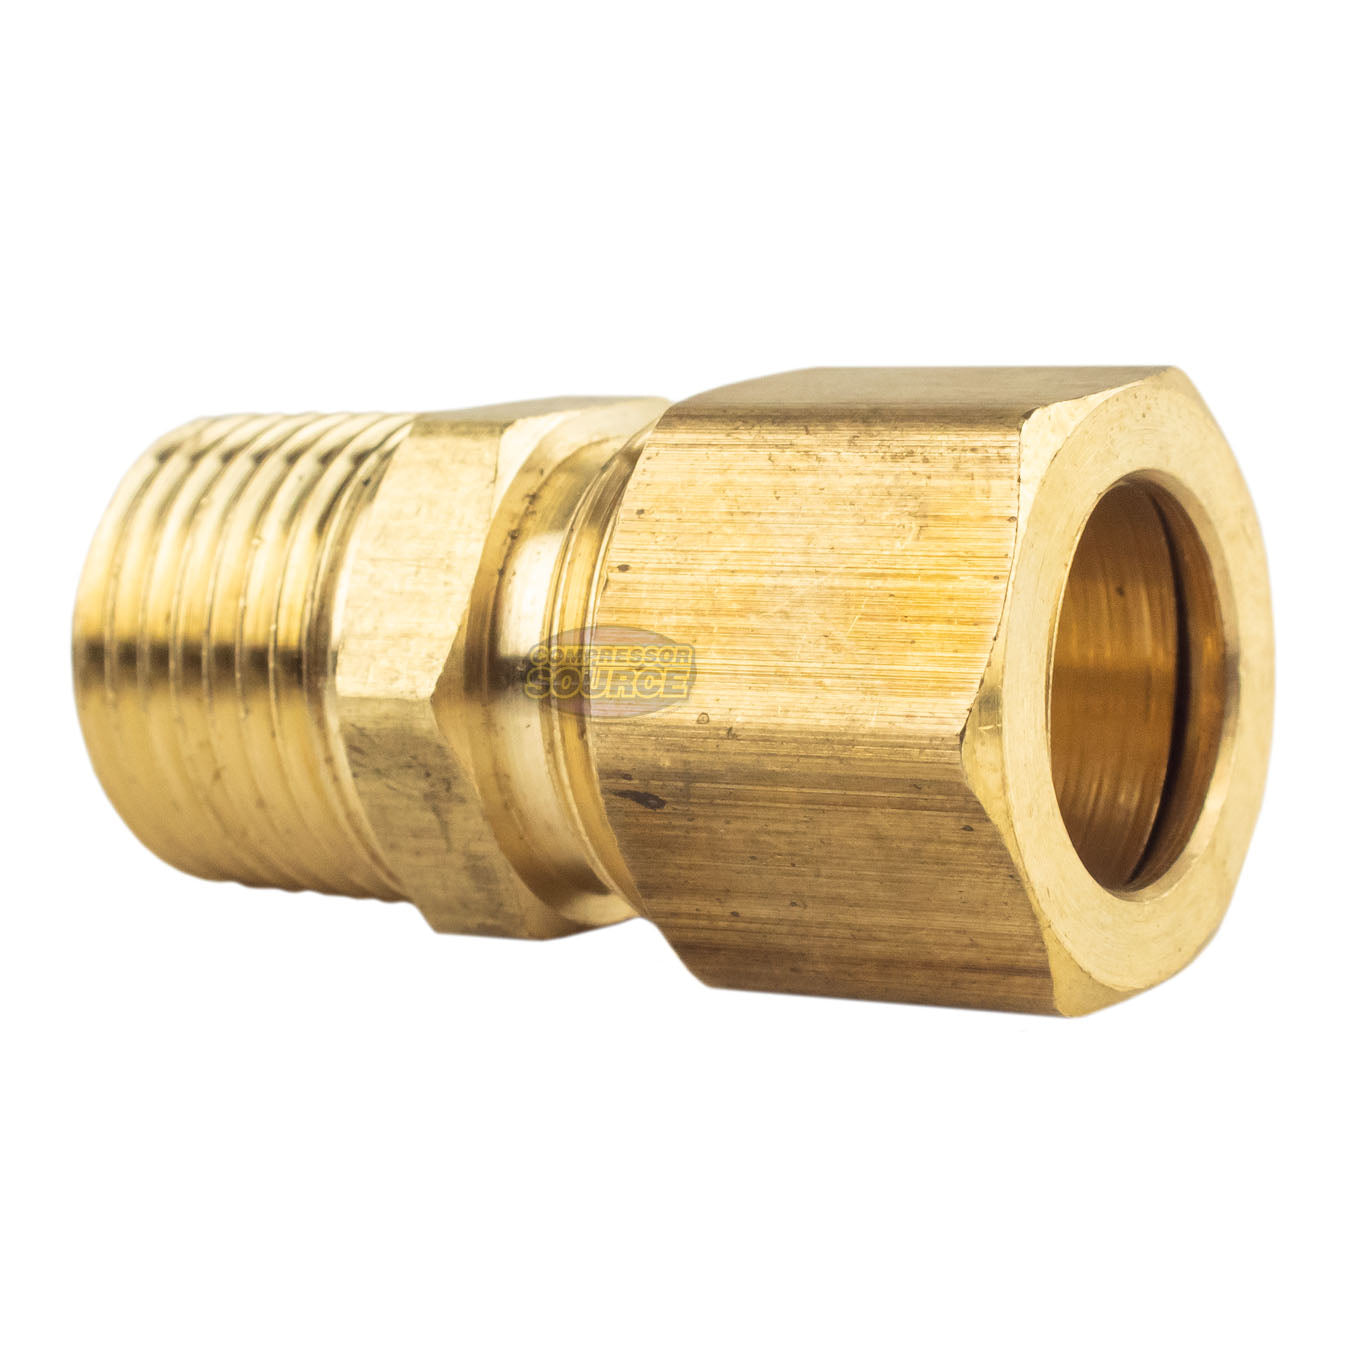 3/8 Brass Compression Fitting x 1/2 Male NPT - Canuck Homebrew